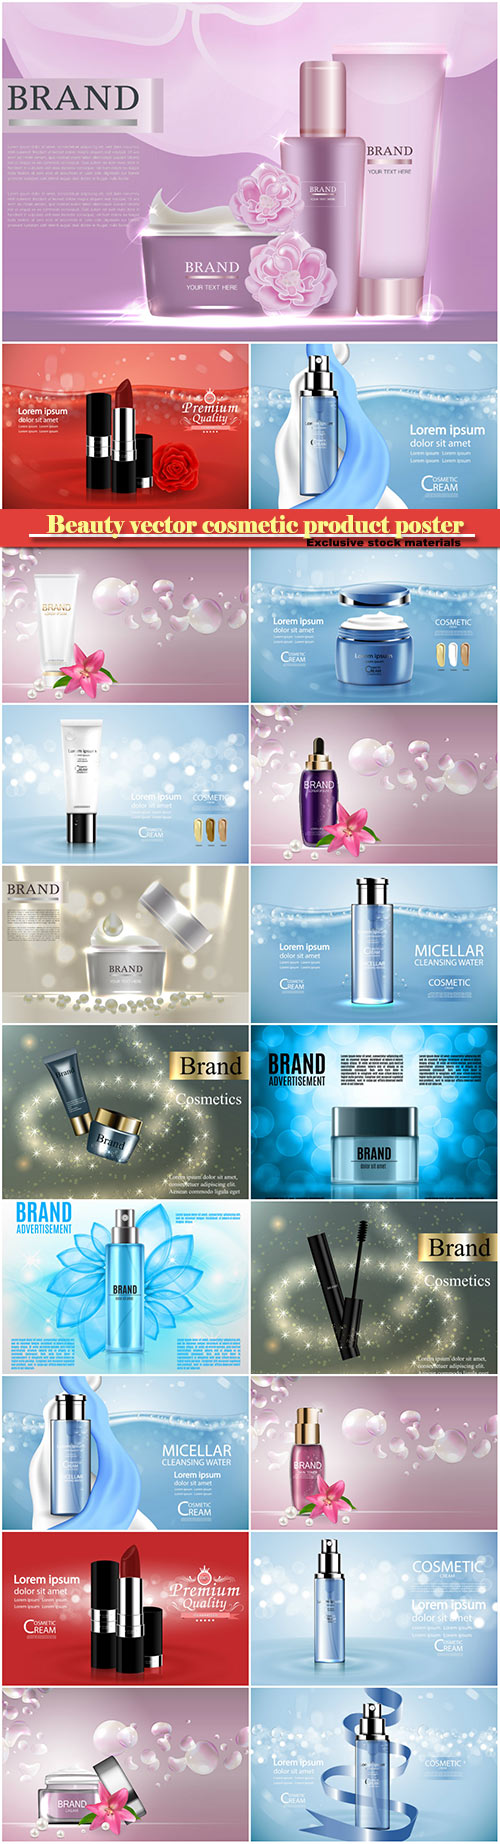 Beauty vector cosmetic product poster # 14